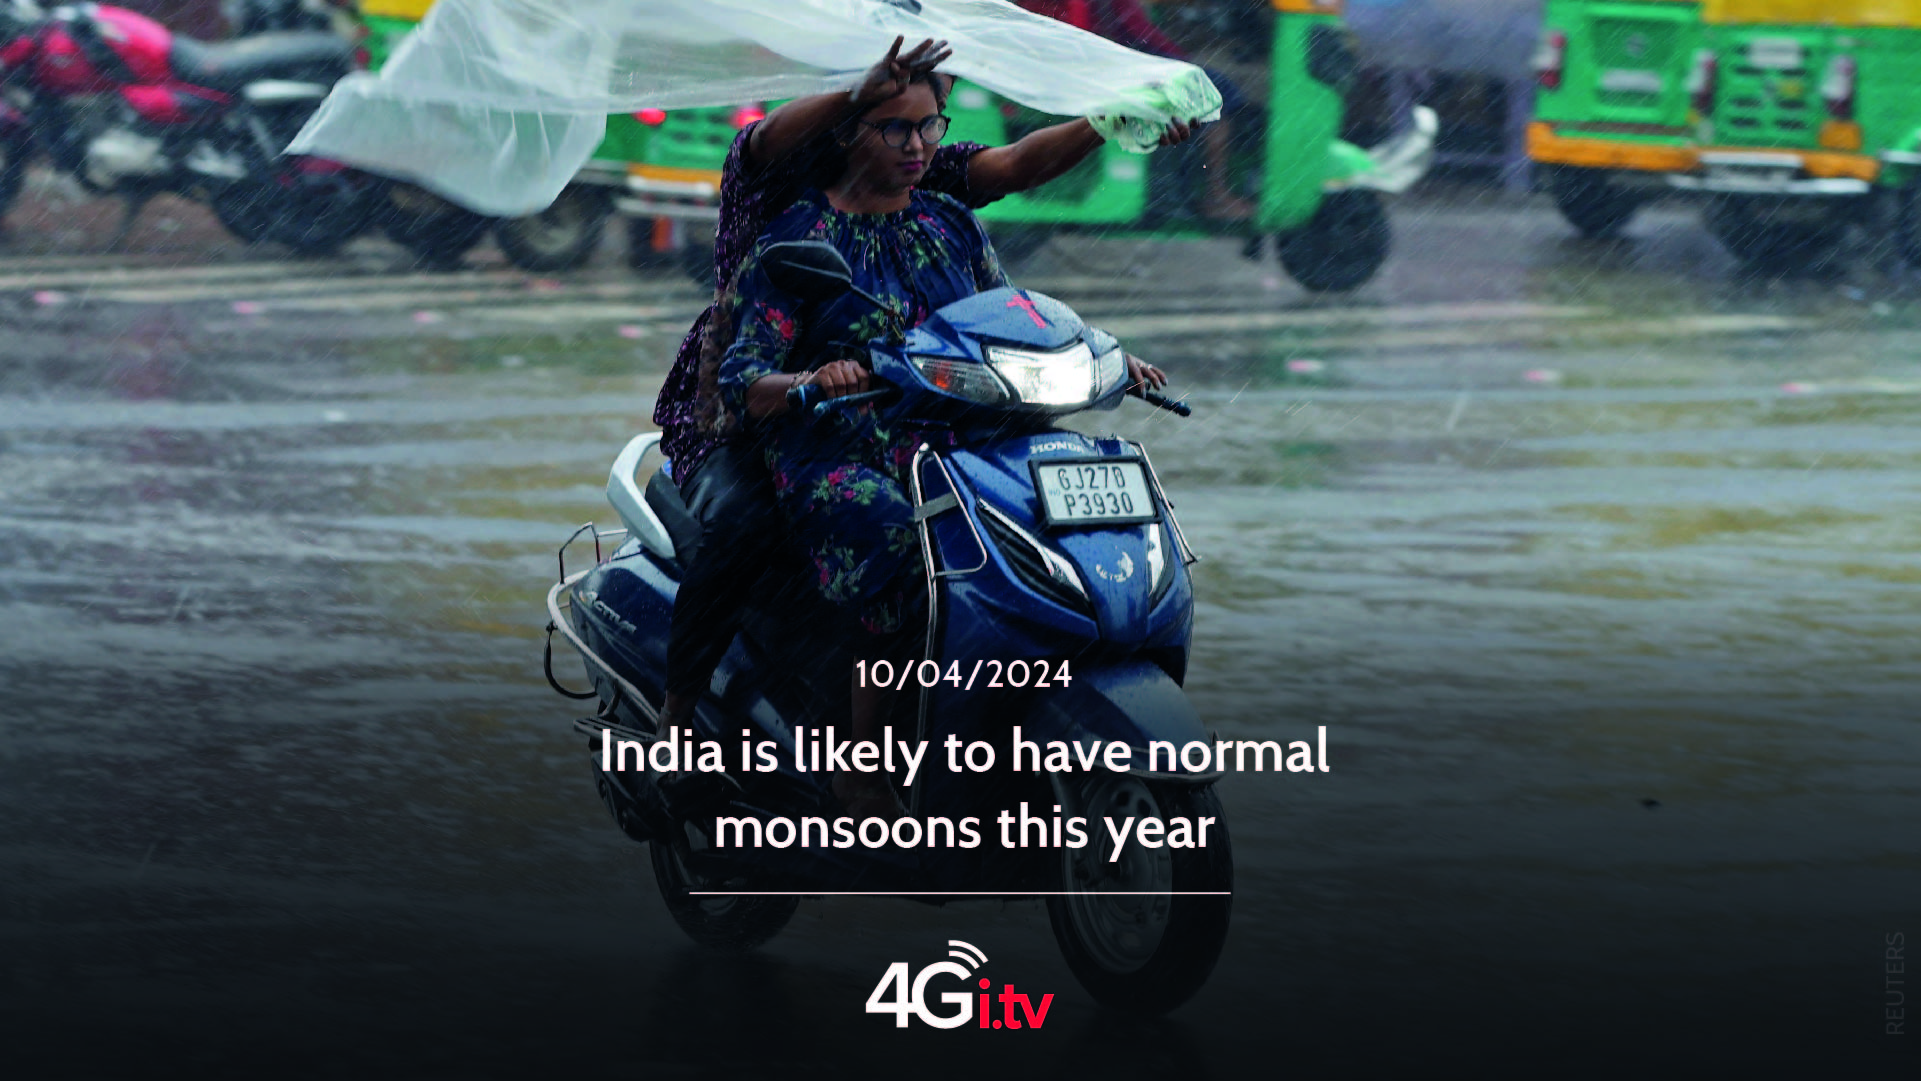 Lesen Sie mehr über den Artikel India is likely to have normal monsoons this year